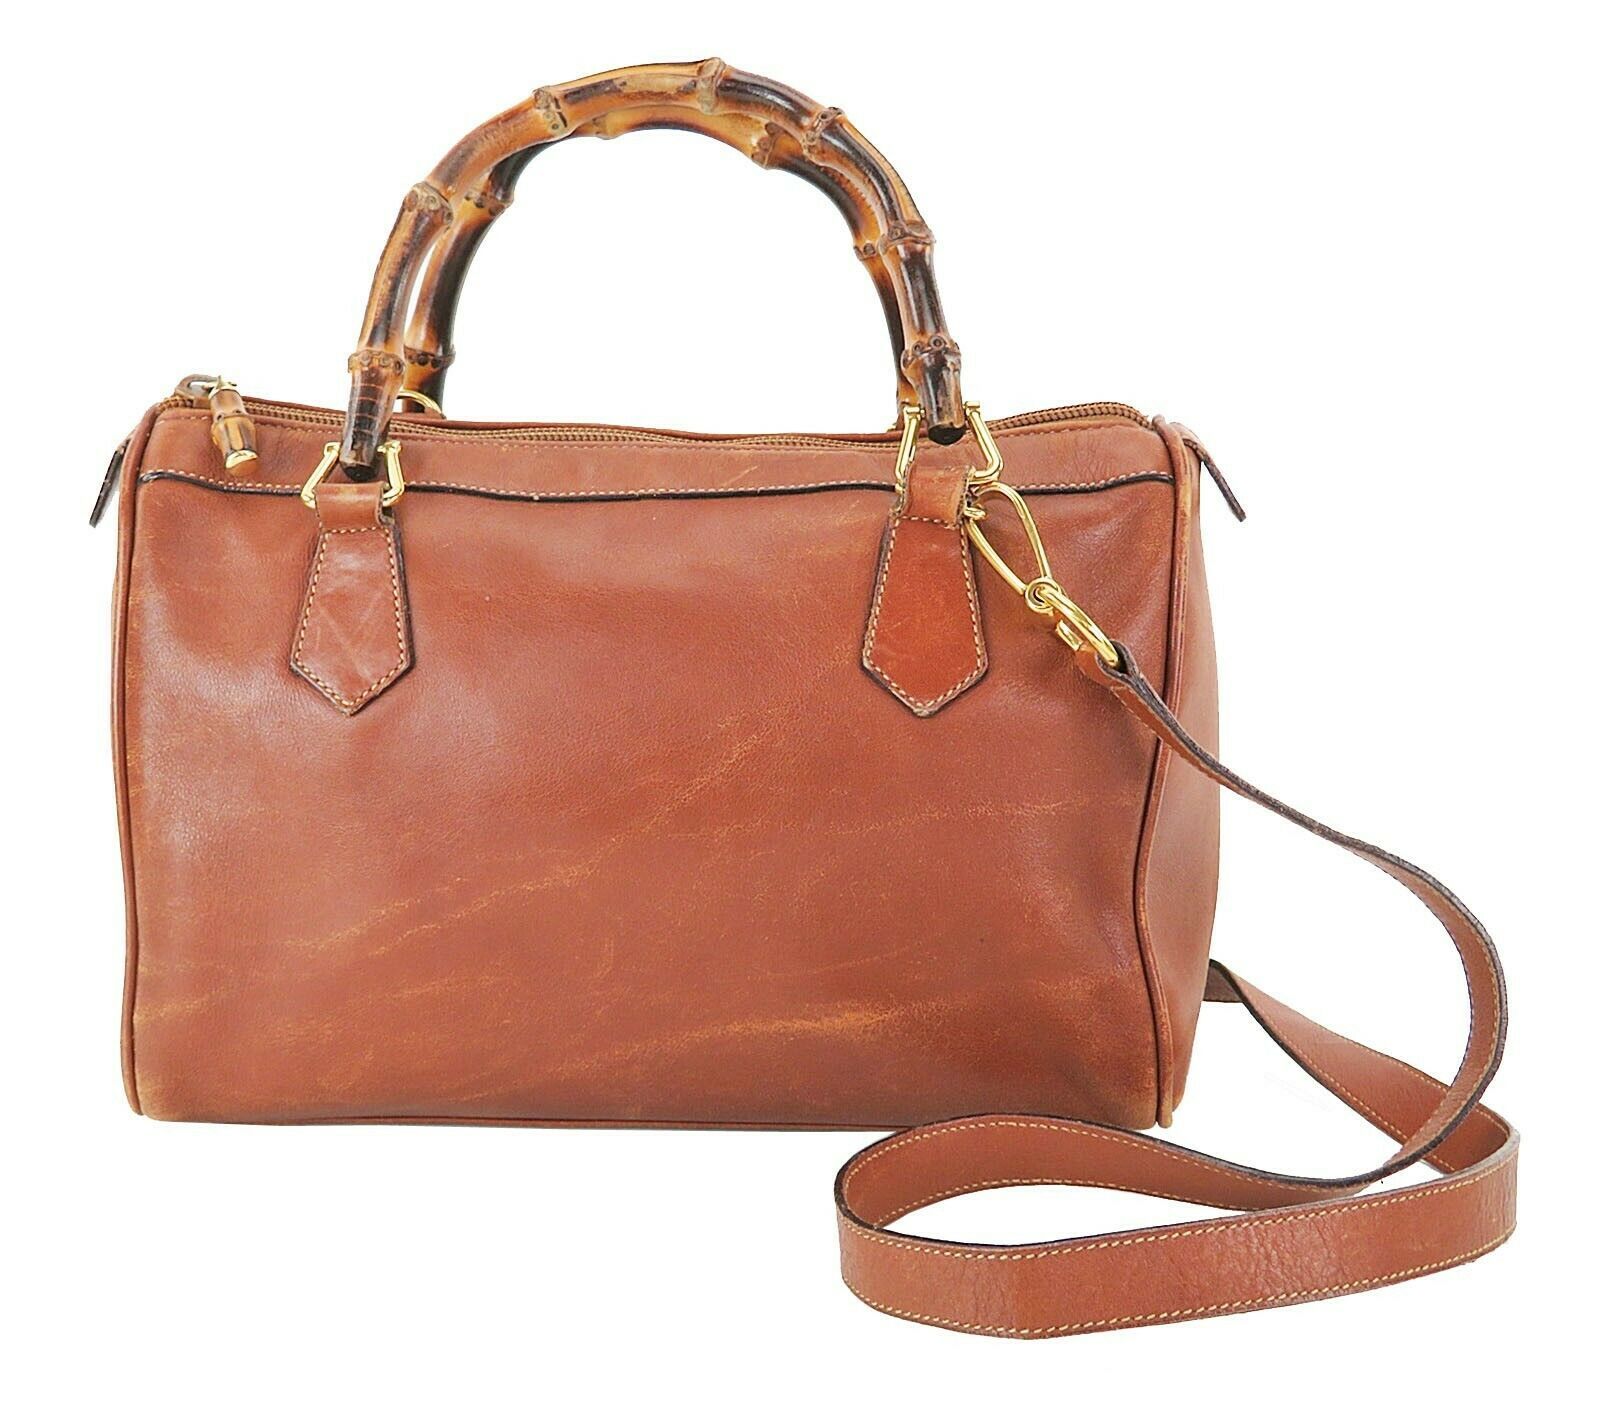 Authentic GUCCI Brown Leather Boston Bamboo Handle 2-Way Shoulder Handbag #35987 - Women's Bags